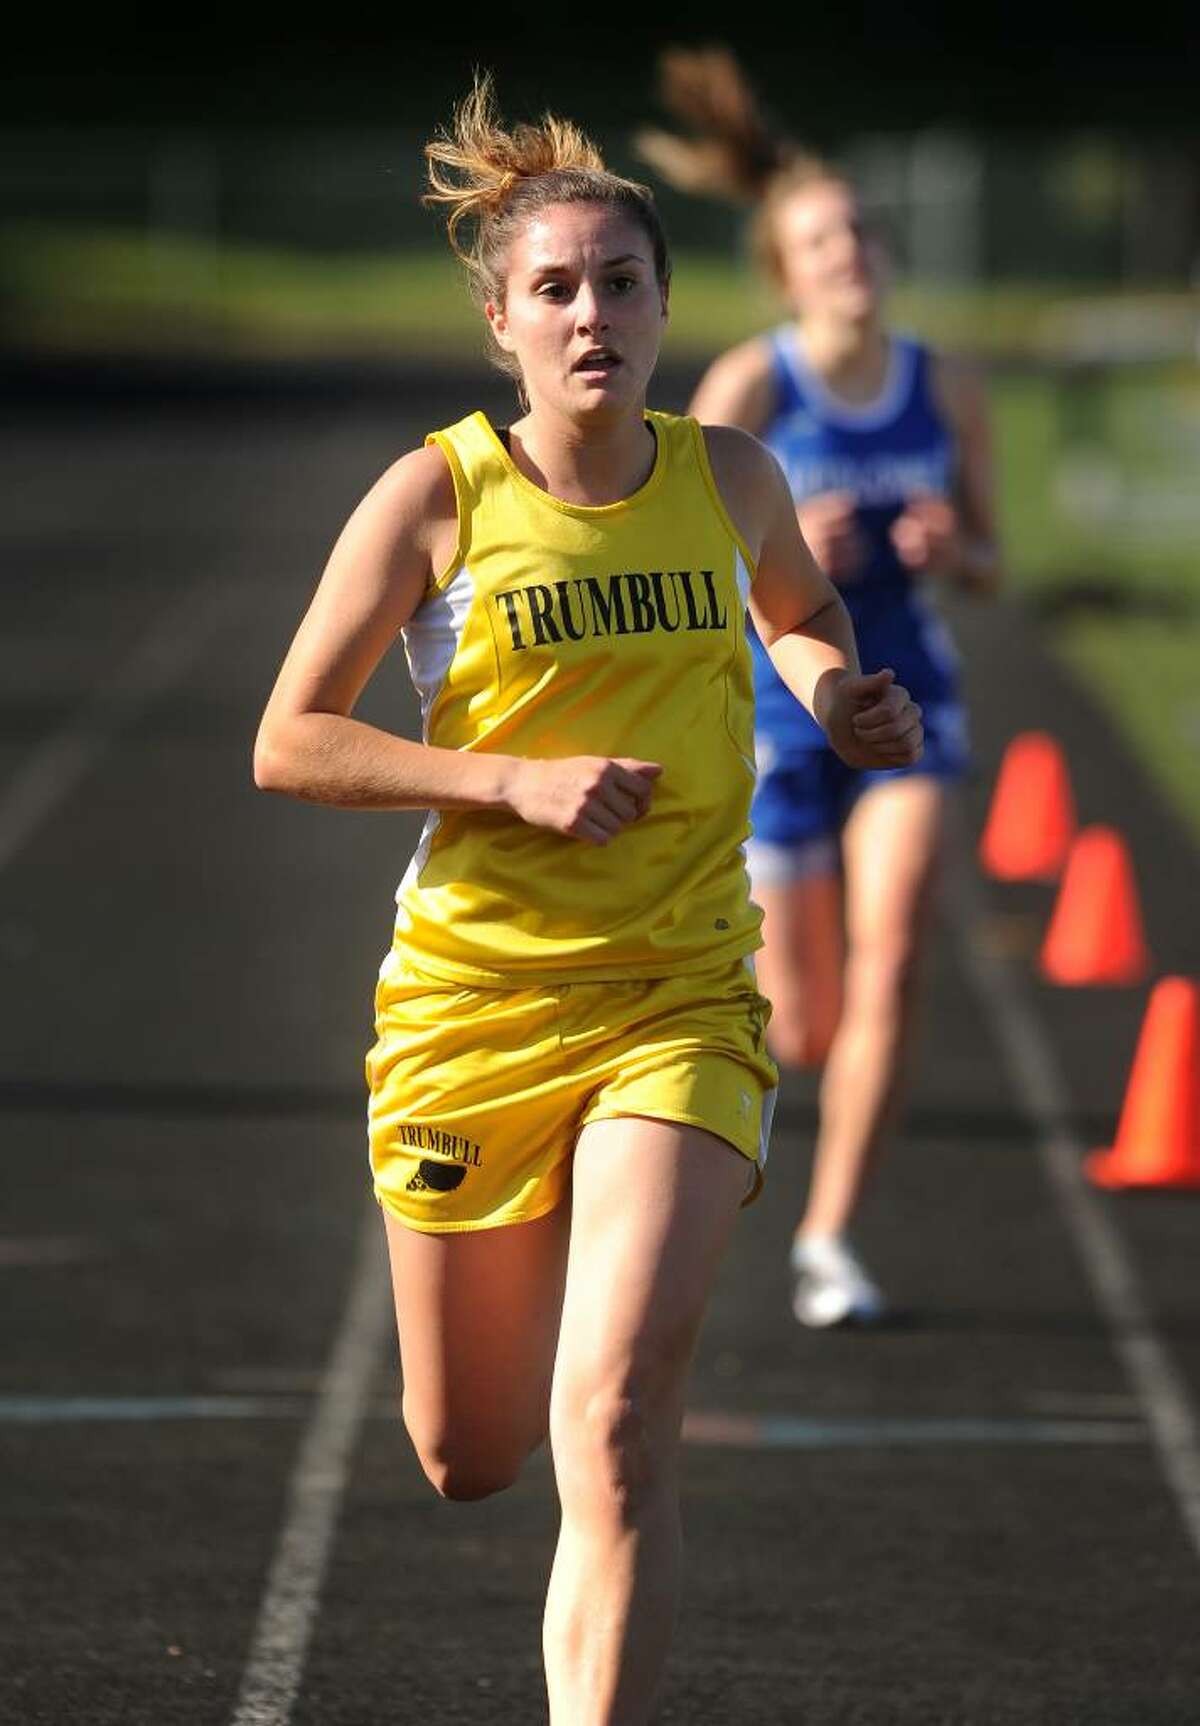 Trumbull's Danielle Klein races to victory over Fairfield Ludlowe's Heather Moriarty in the 1600 meters during Monday's track meet at Trumbull High School.